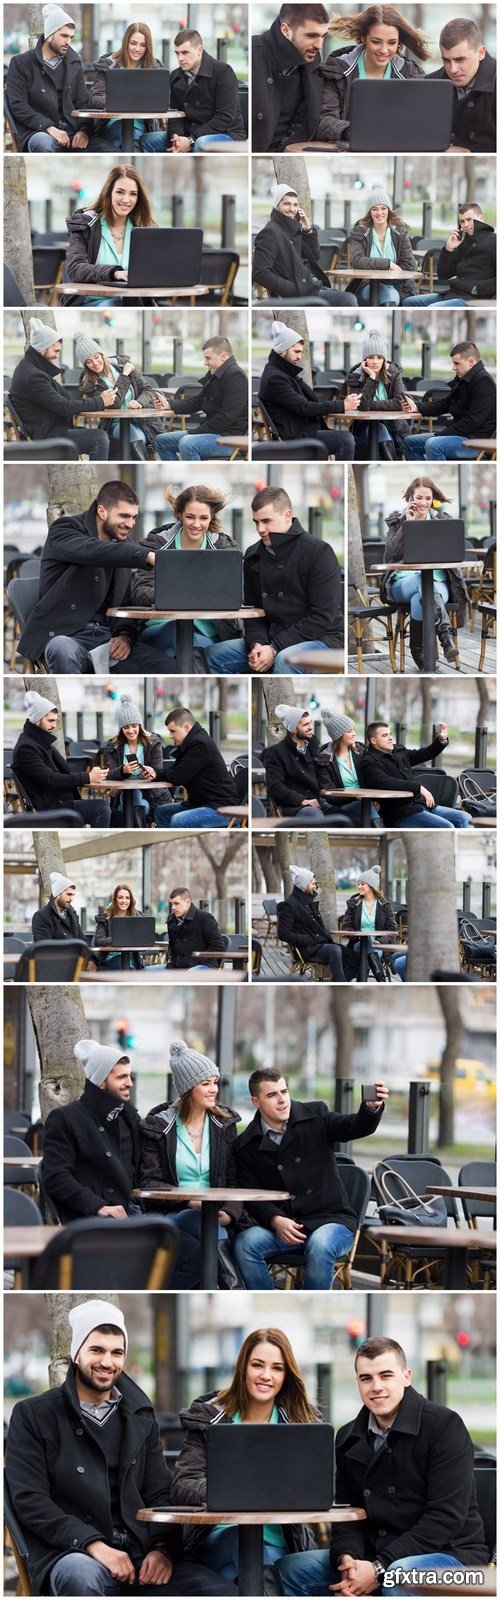 Group of students is sitting in an outdoor cafe and using laptop - 14xUHQ JPEG Photo Stock